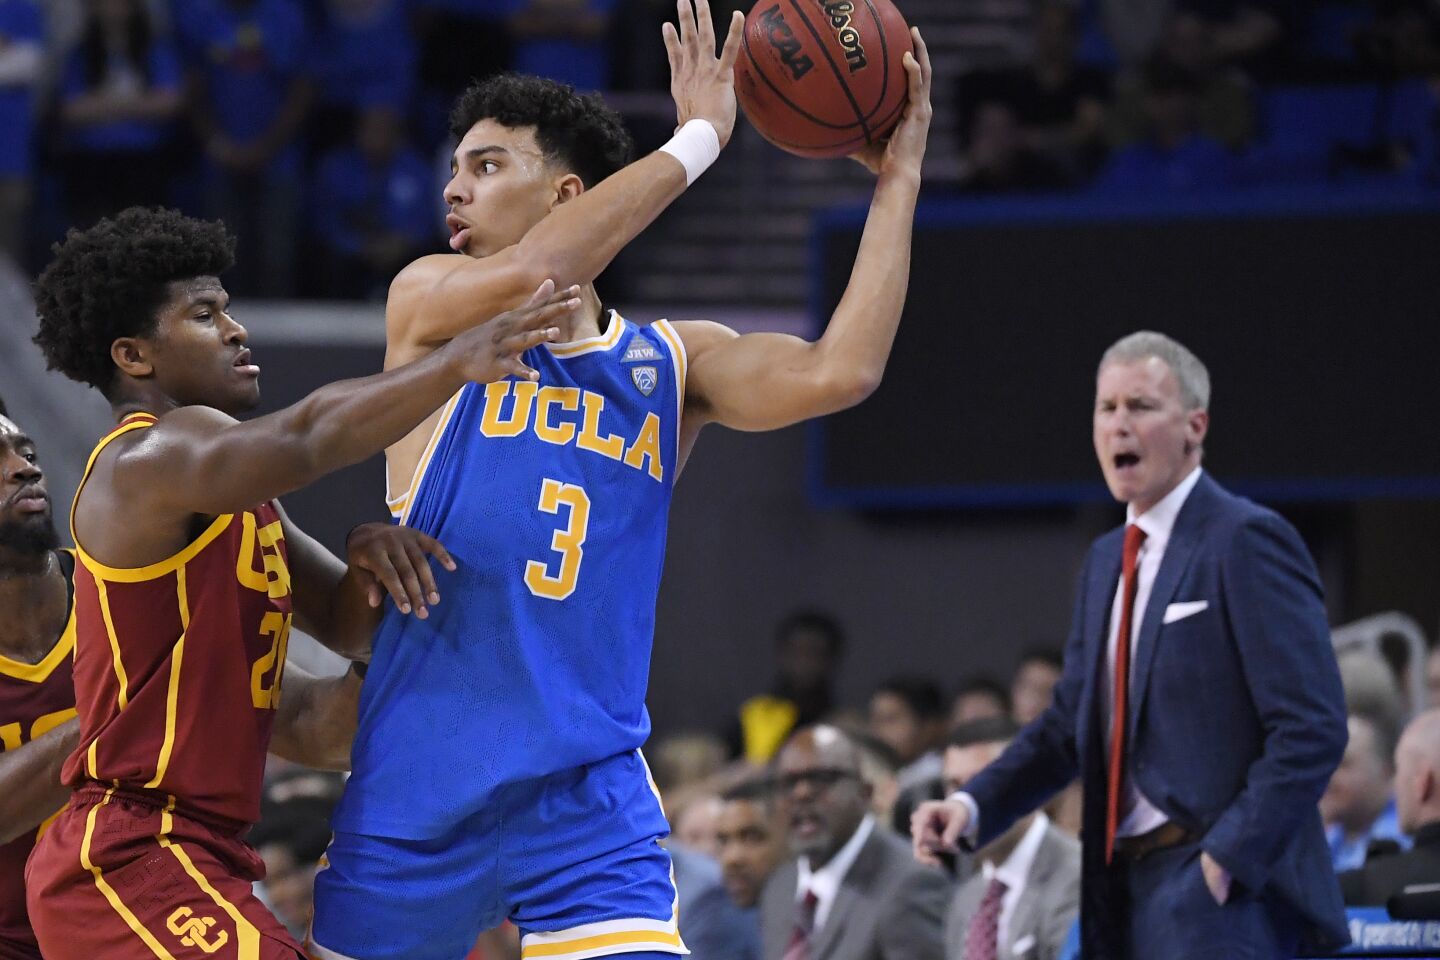 UCLA guard Jules Bernard looks to pass while being defended by USC guard Ethan Anderson during a game Jan. 11 at Pauley Pavilion.